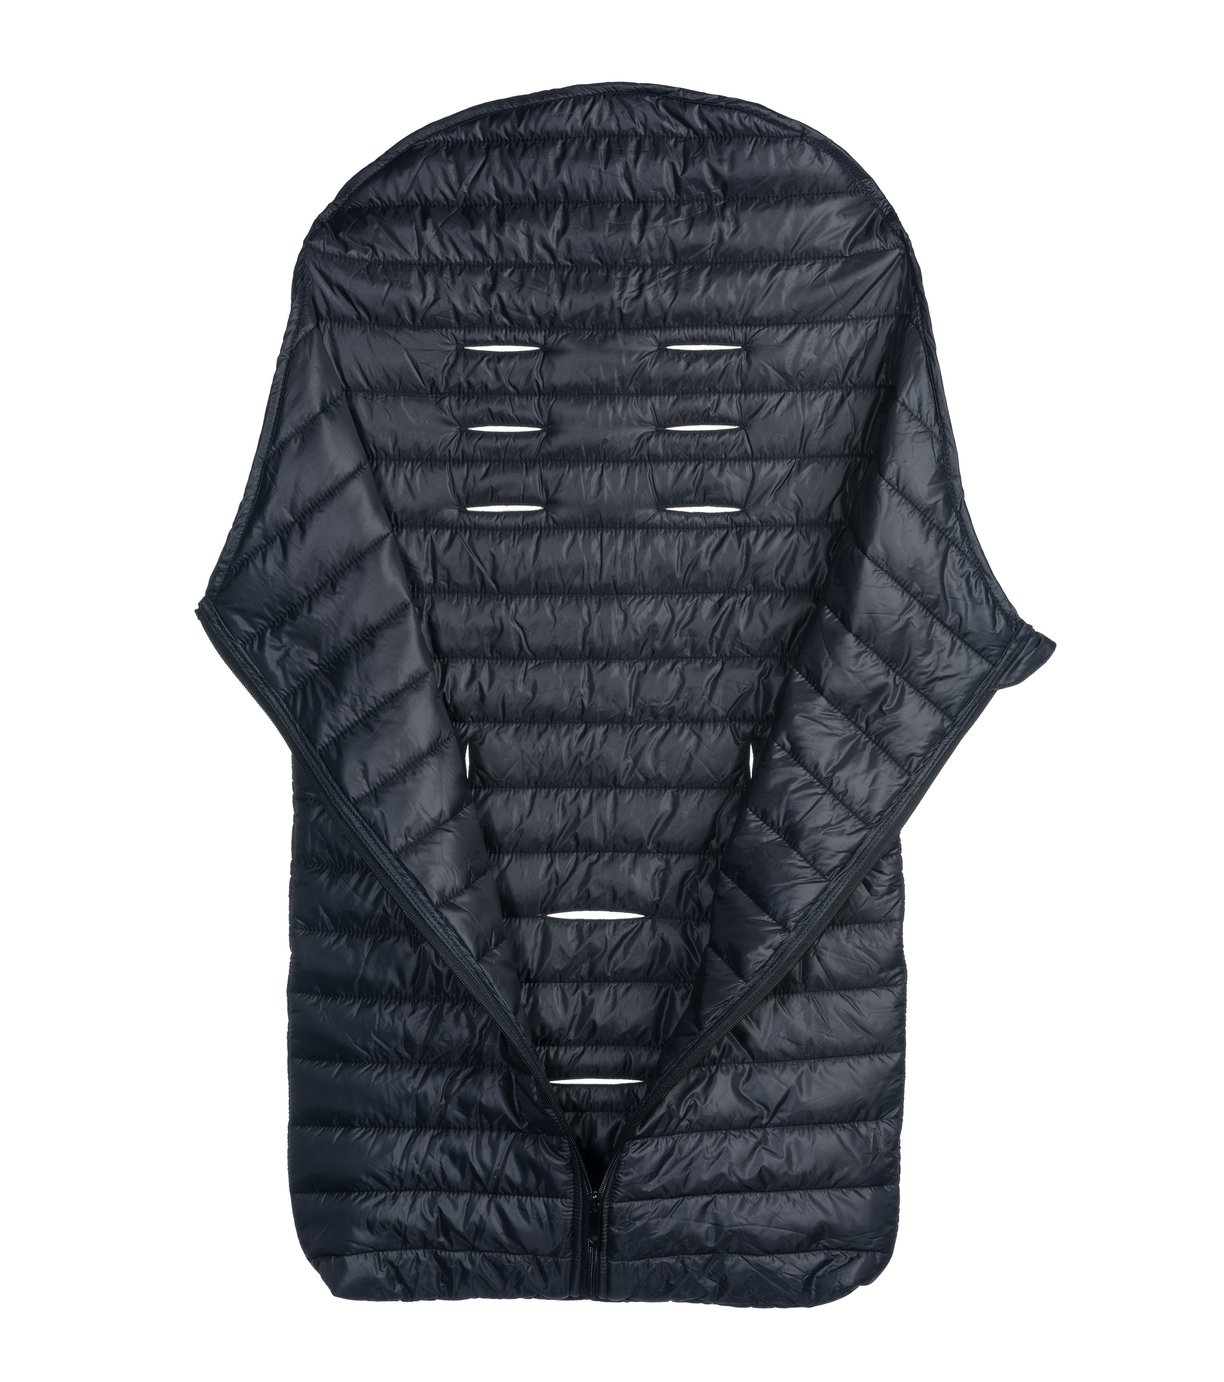 Safety 1st BabyDoune Footmuff Review